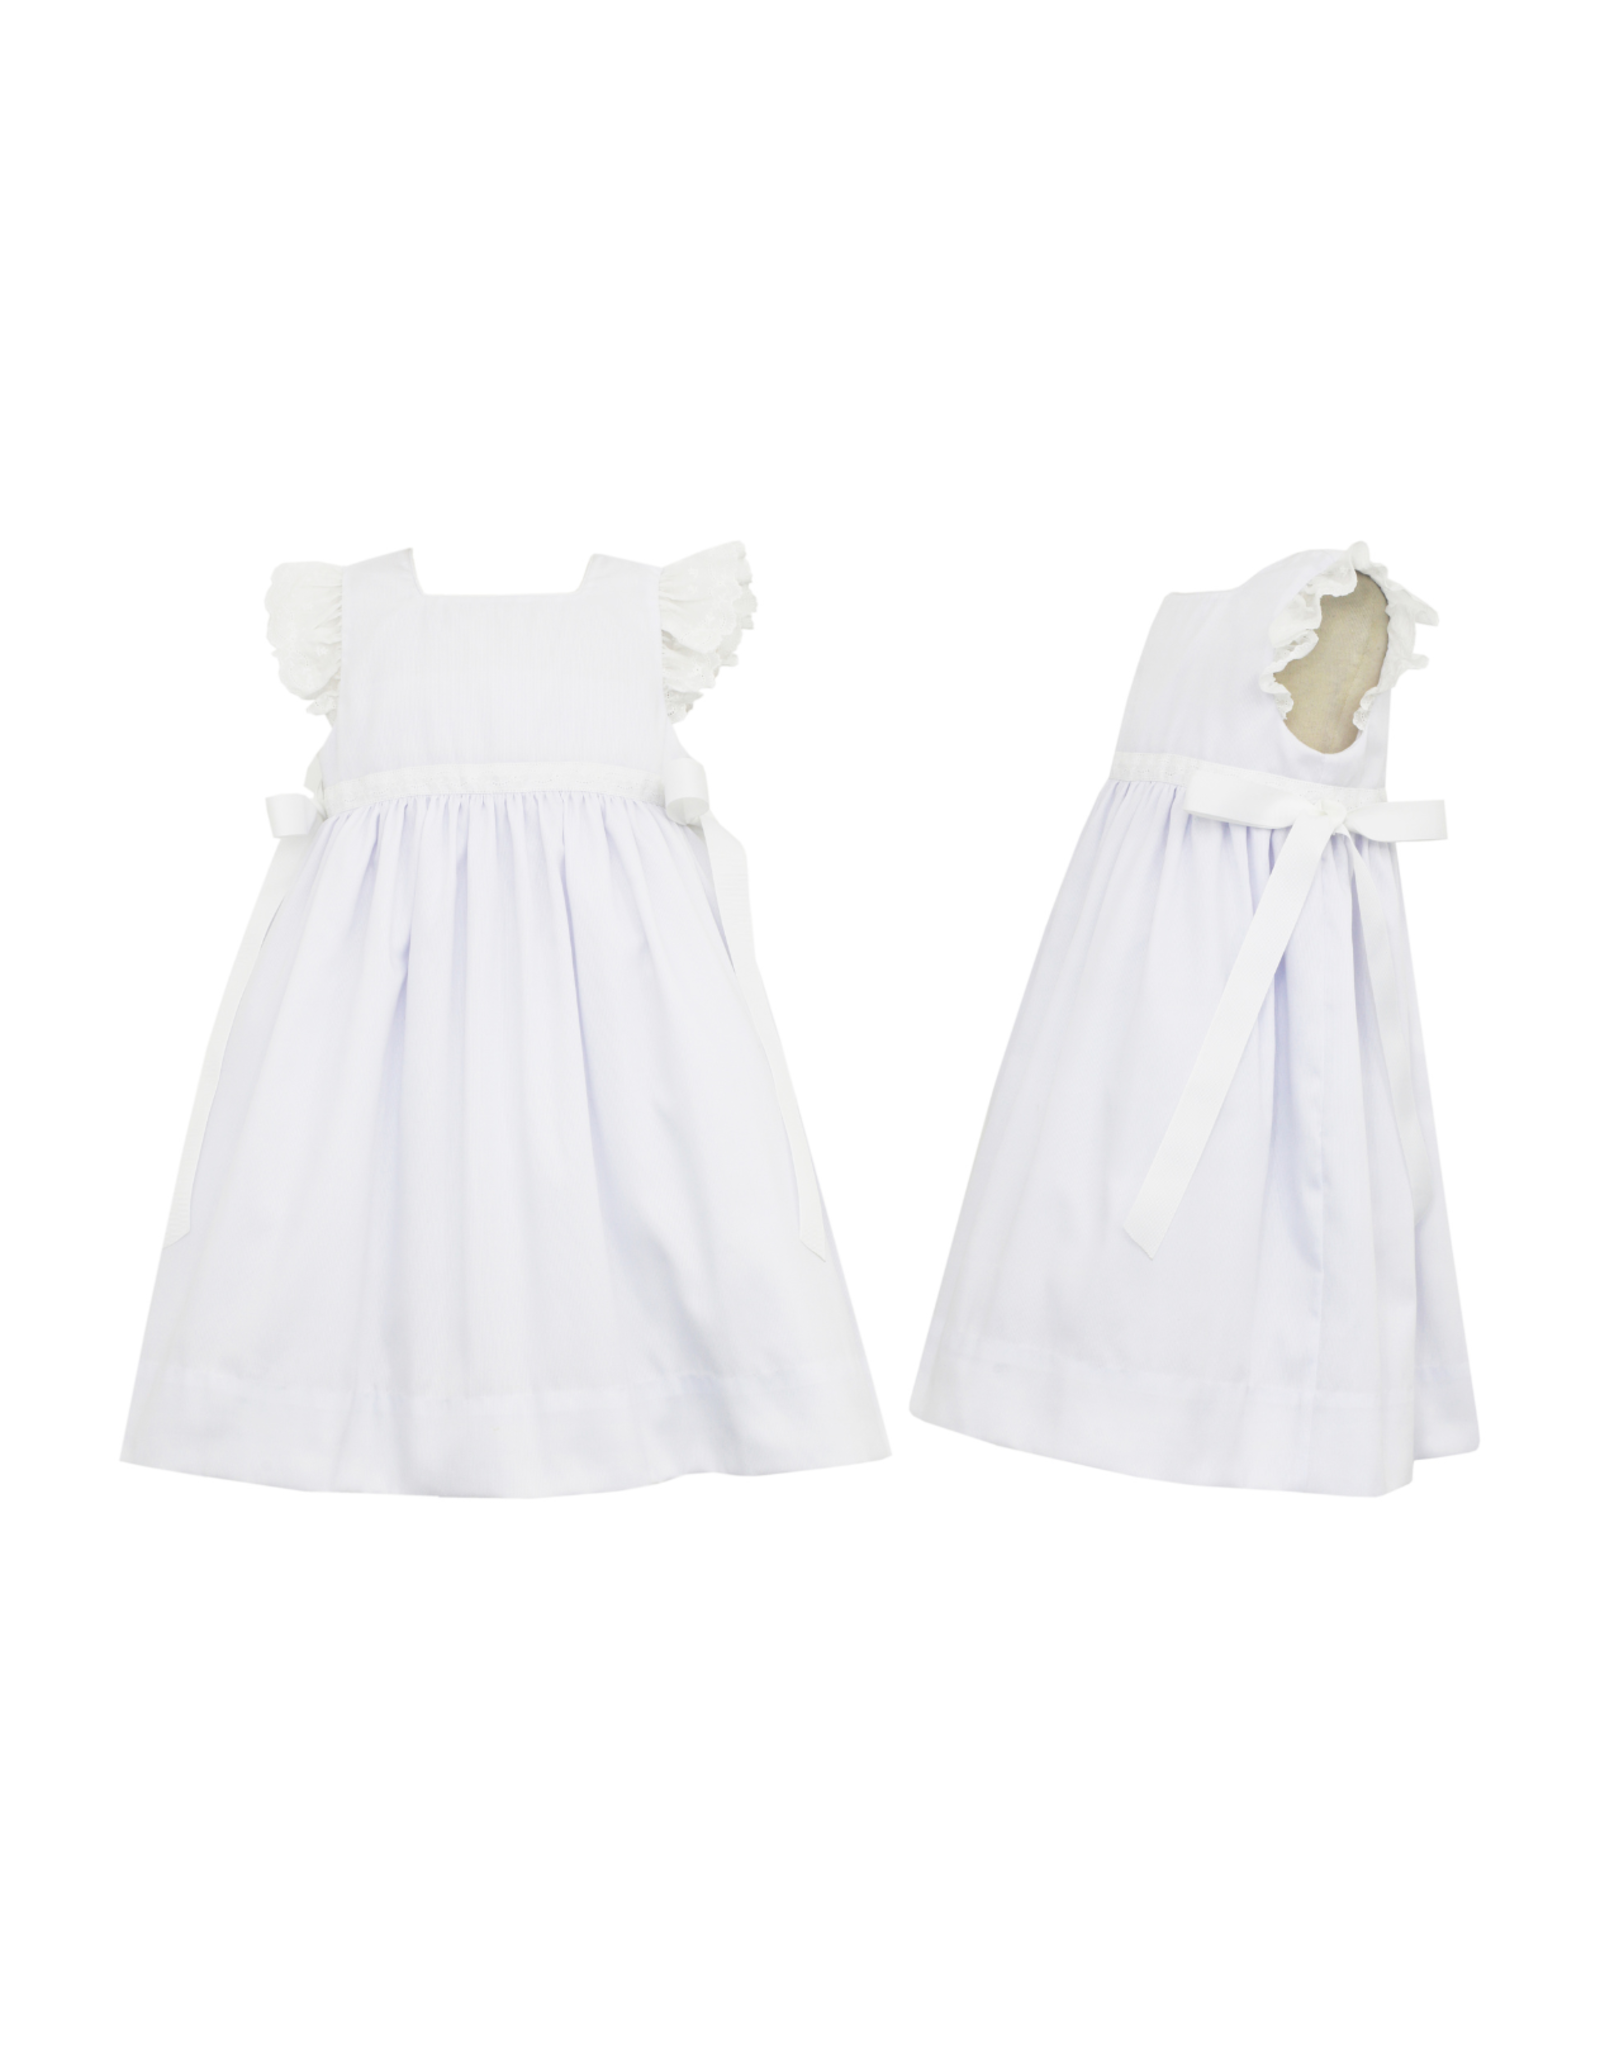 Claire and Charlie White Pique Dress with Eyelet Sleeves and Ribbon